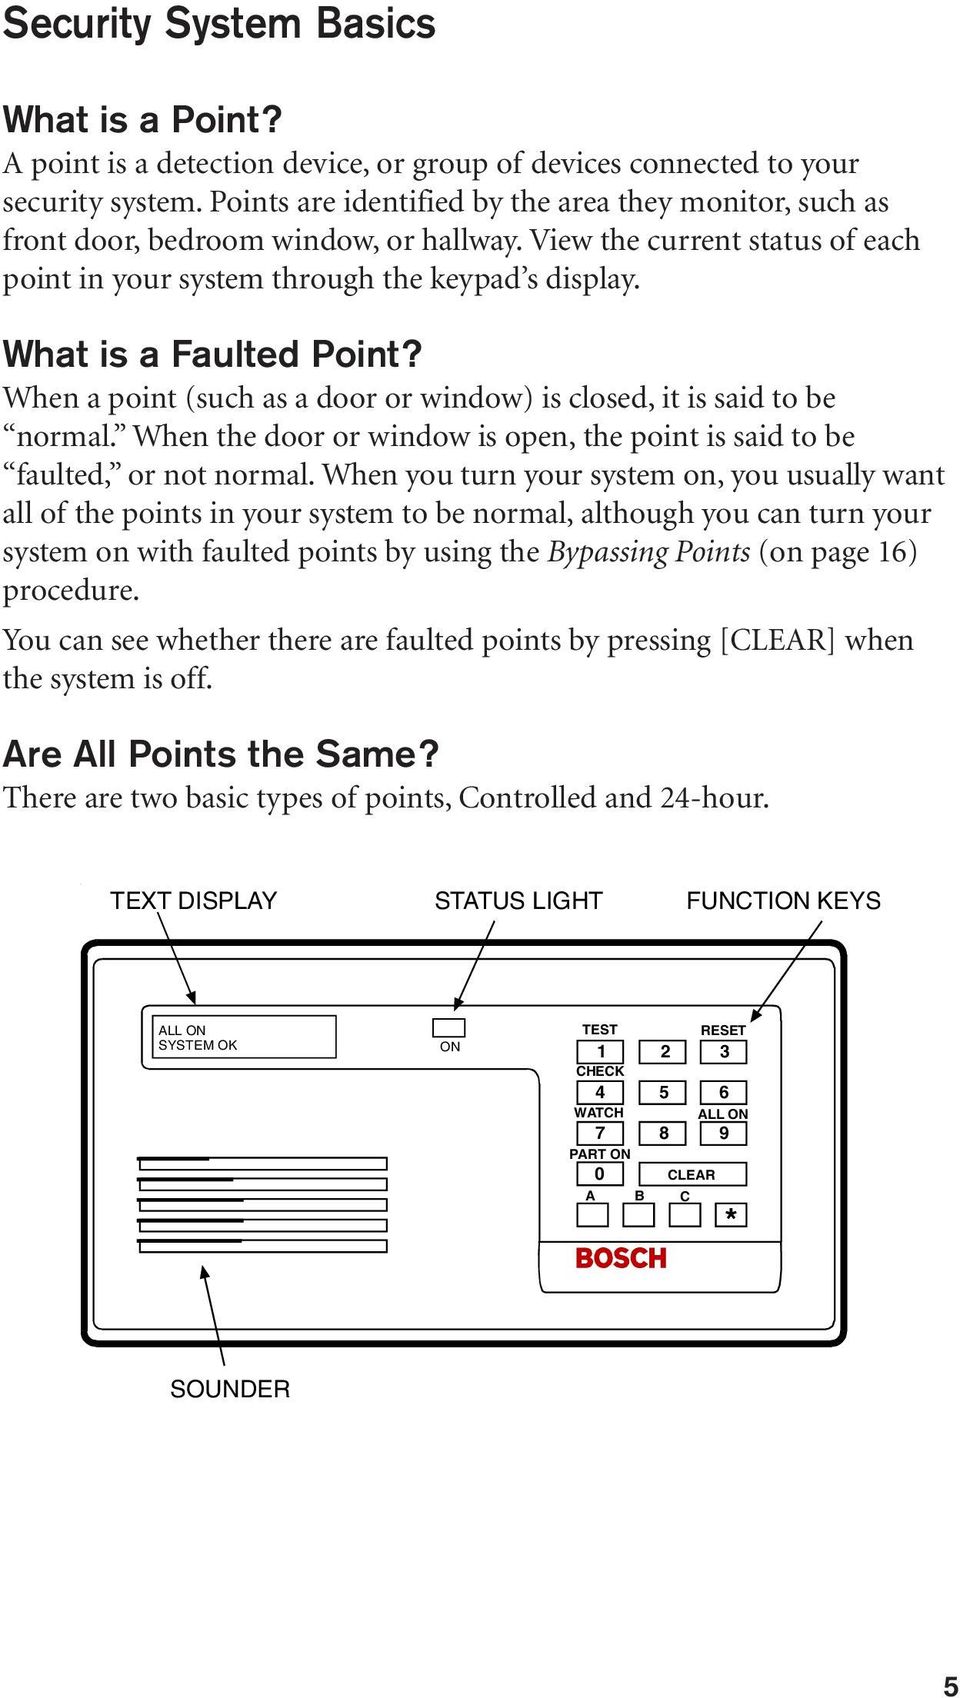 What is a Faulted Point? When a point (such as a door or window) is closed, it is said to be normal. When the door or window is open, the point is said to be faulted, or not normal.